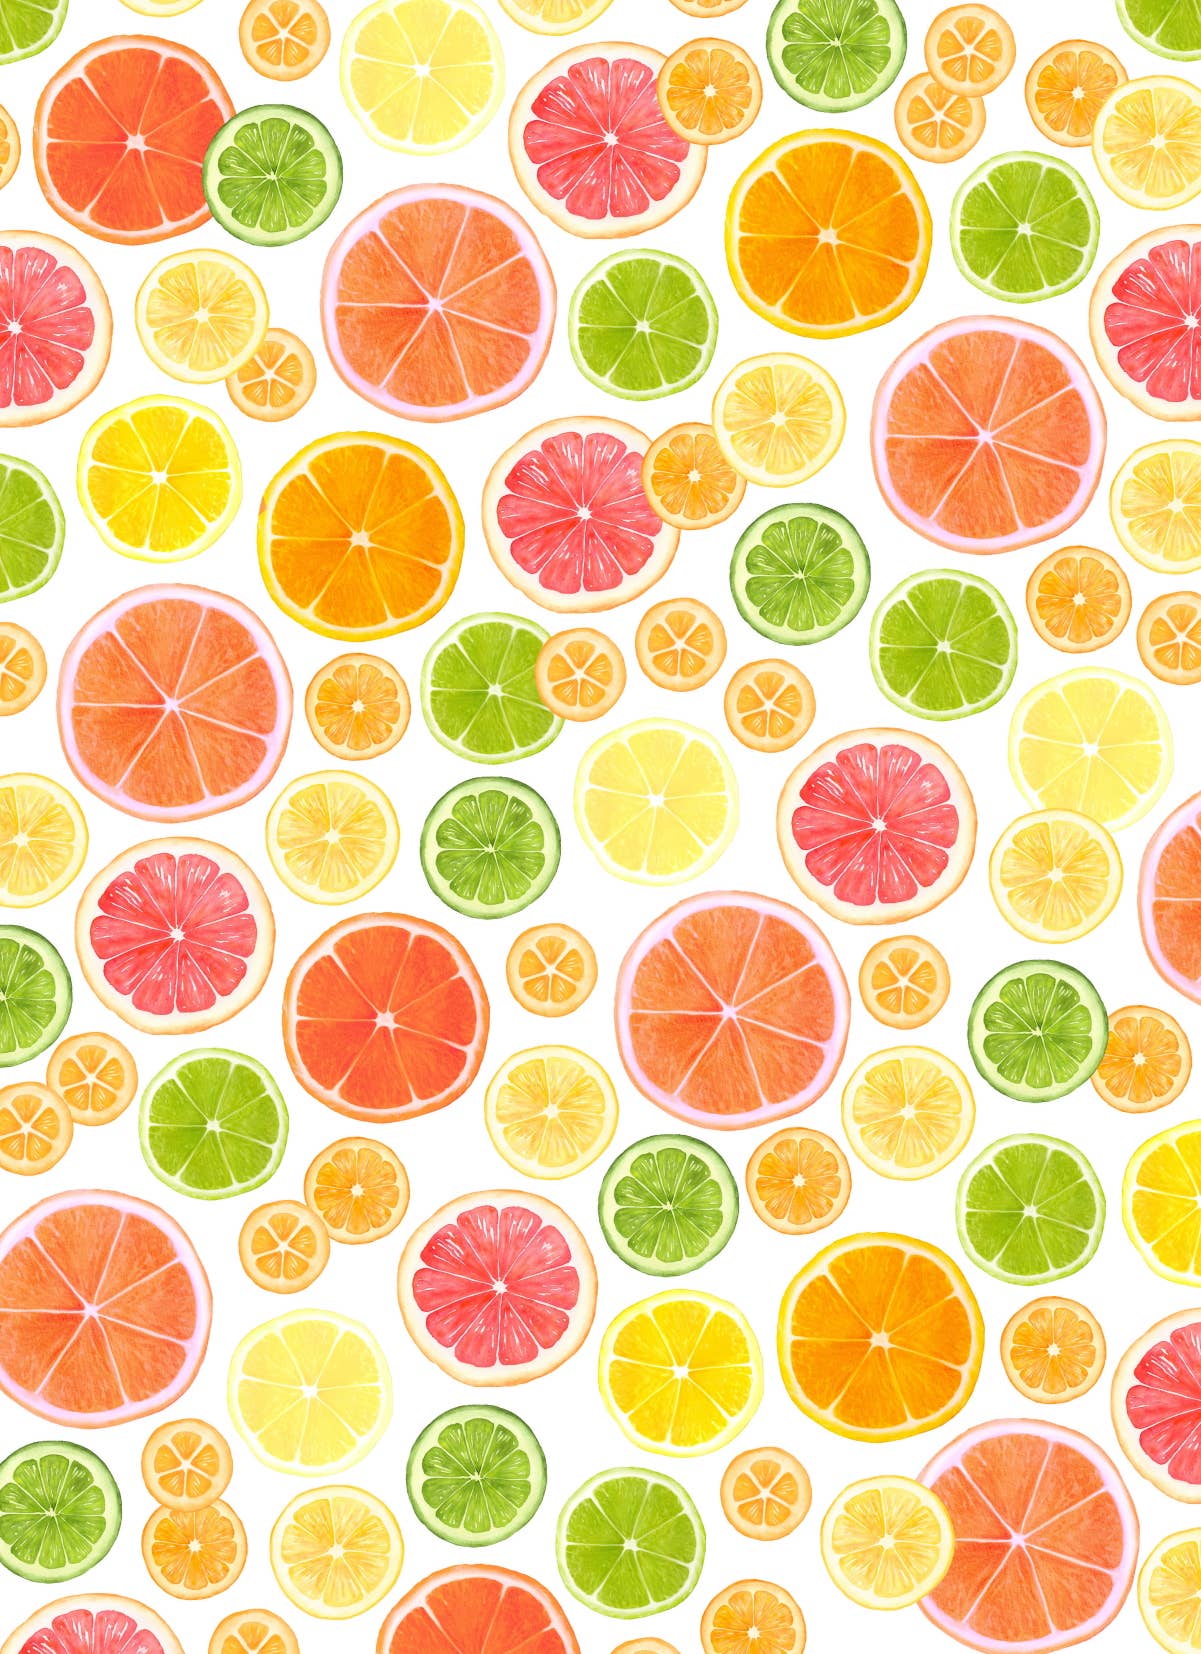 An up-close photo of the Citrus Kitchen Towel pattern, featuring citrus slices in orange, yellow, green, and pink.